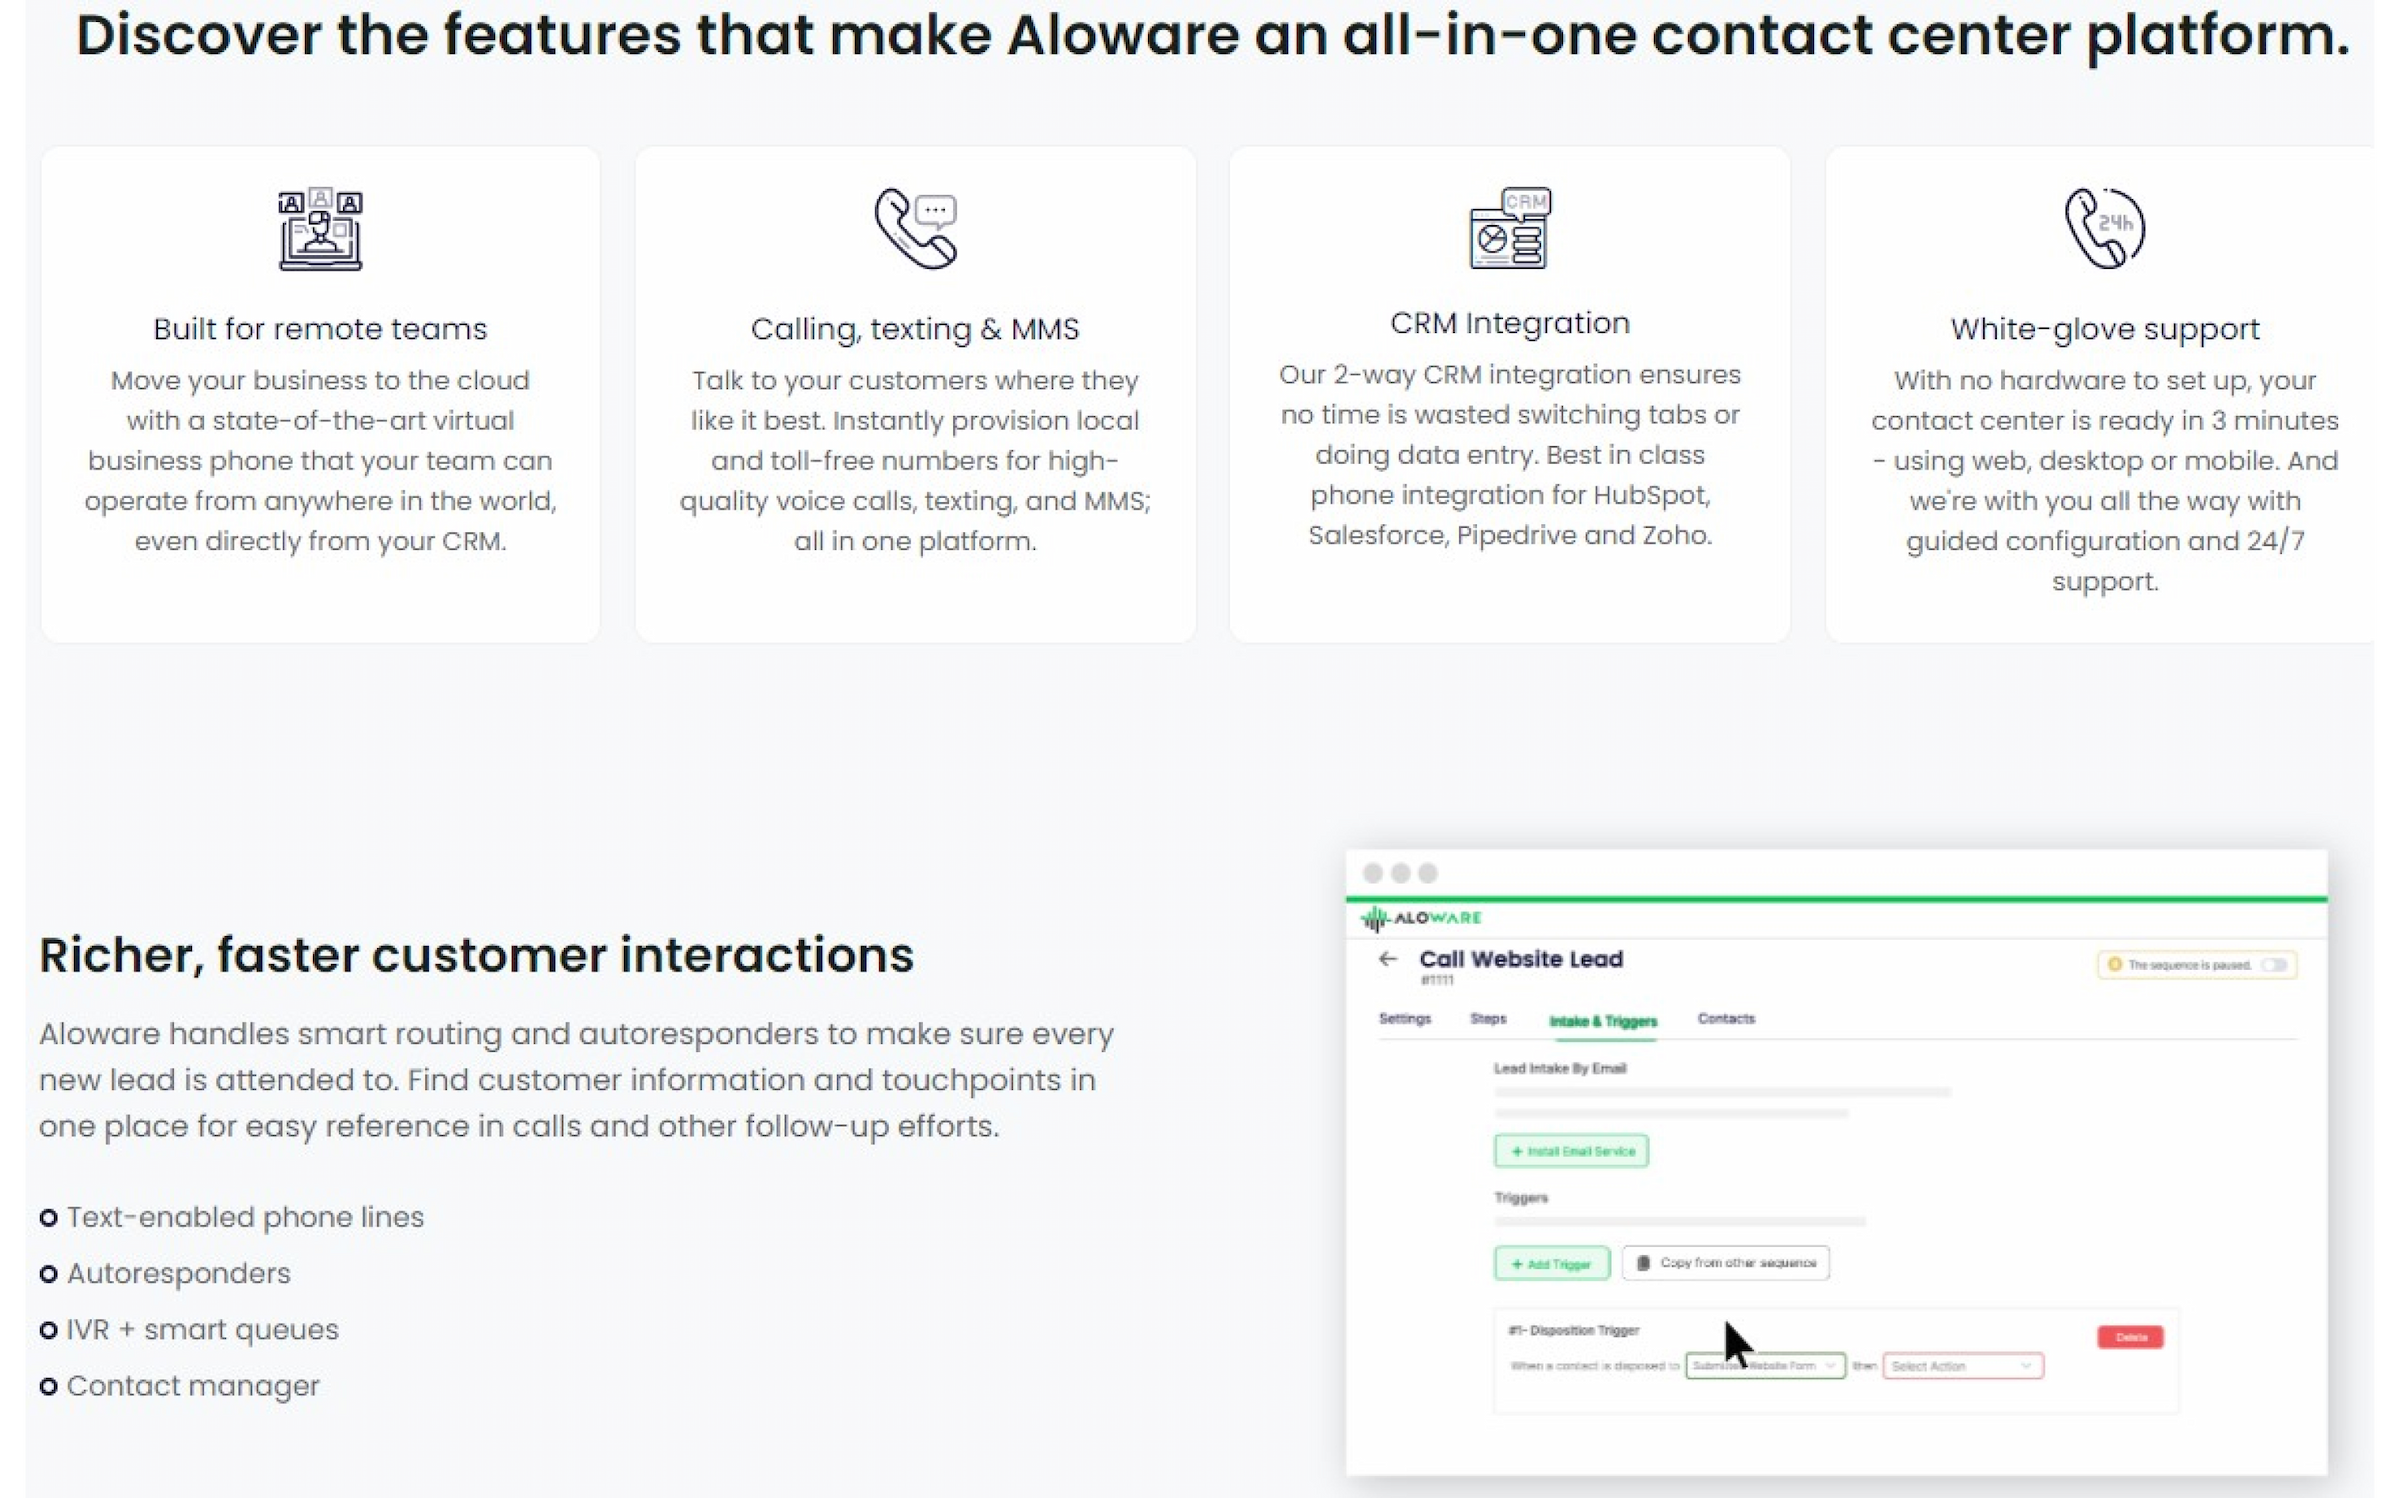 Features of Aloware